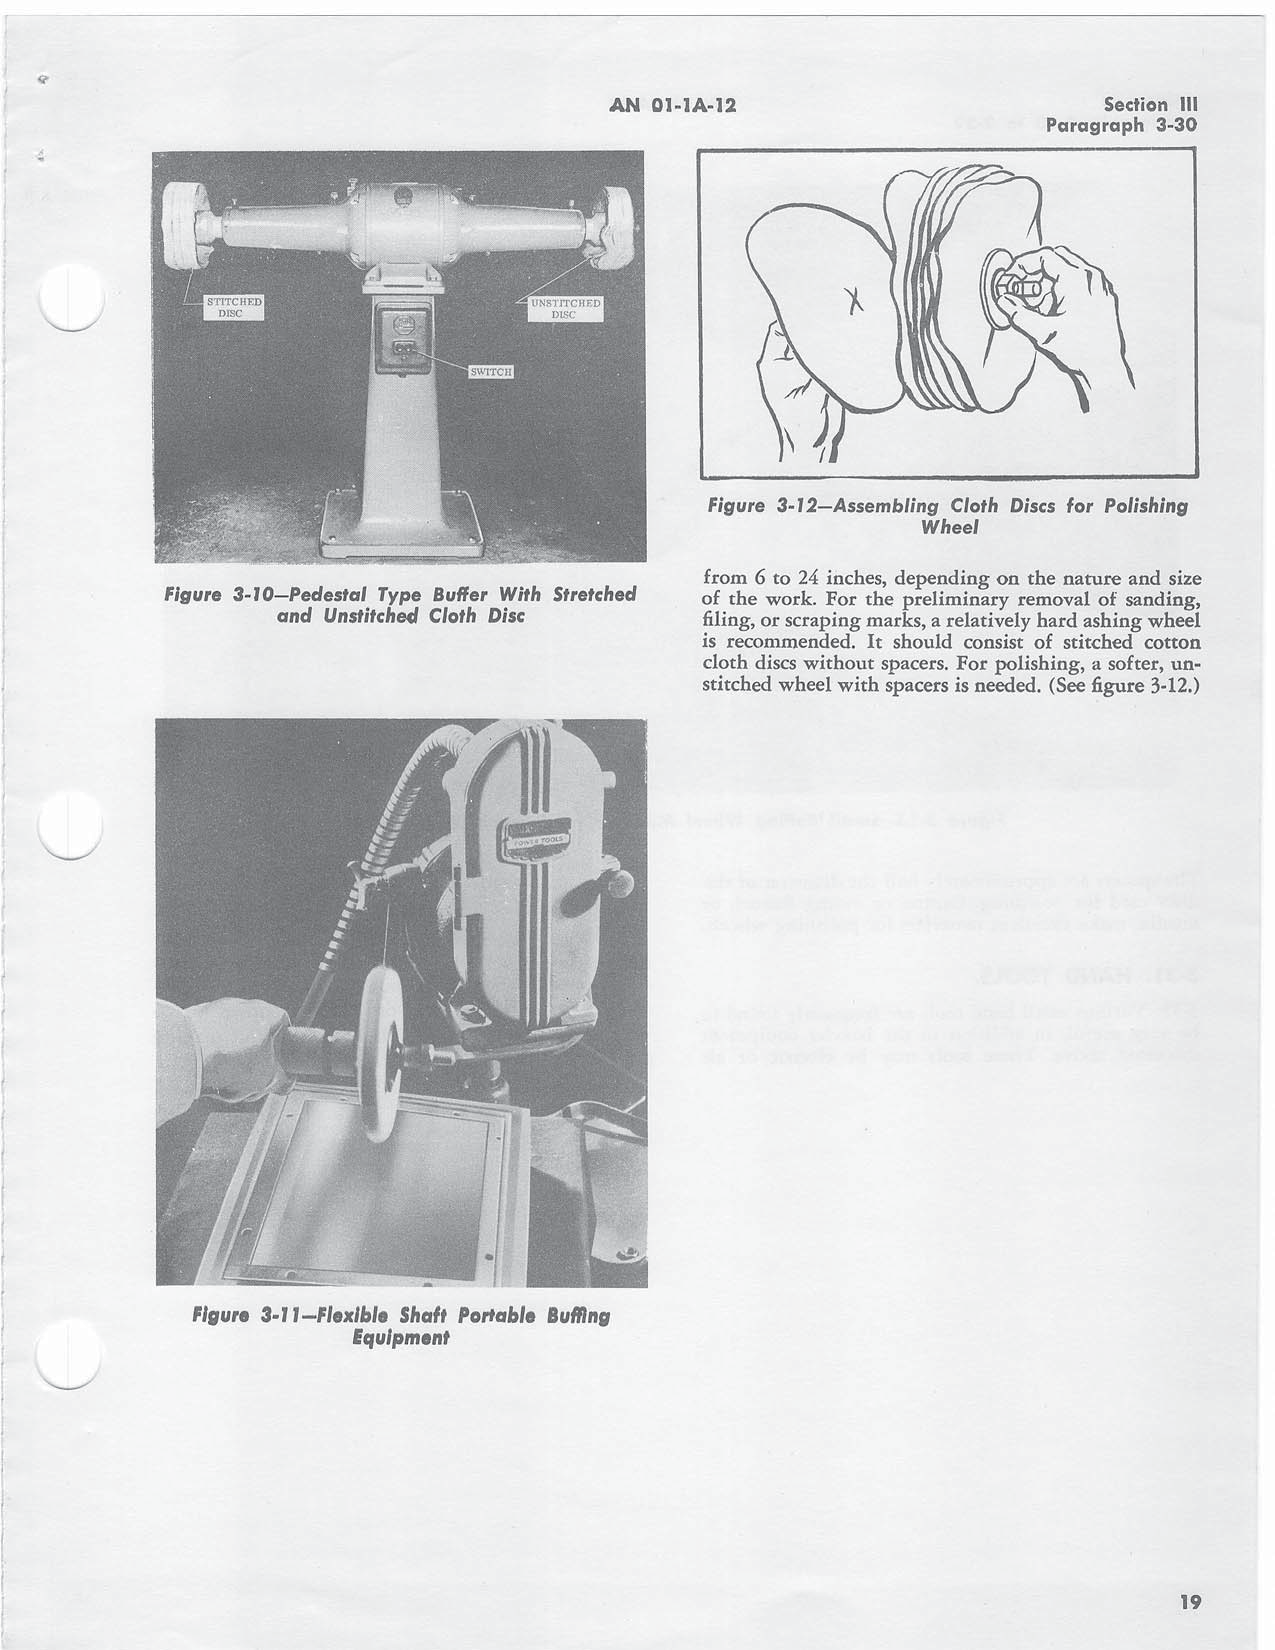 Sample page 25 from AirCorps Library document: General Fabrication, Maintenance and Repair of Transparent Plastics